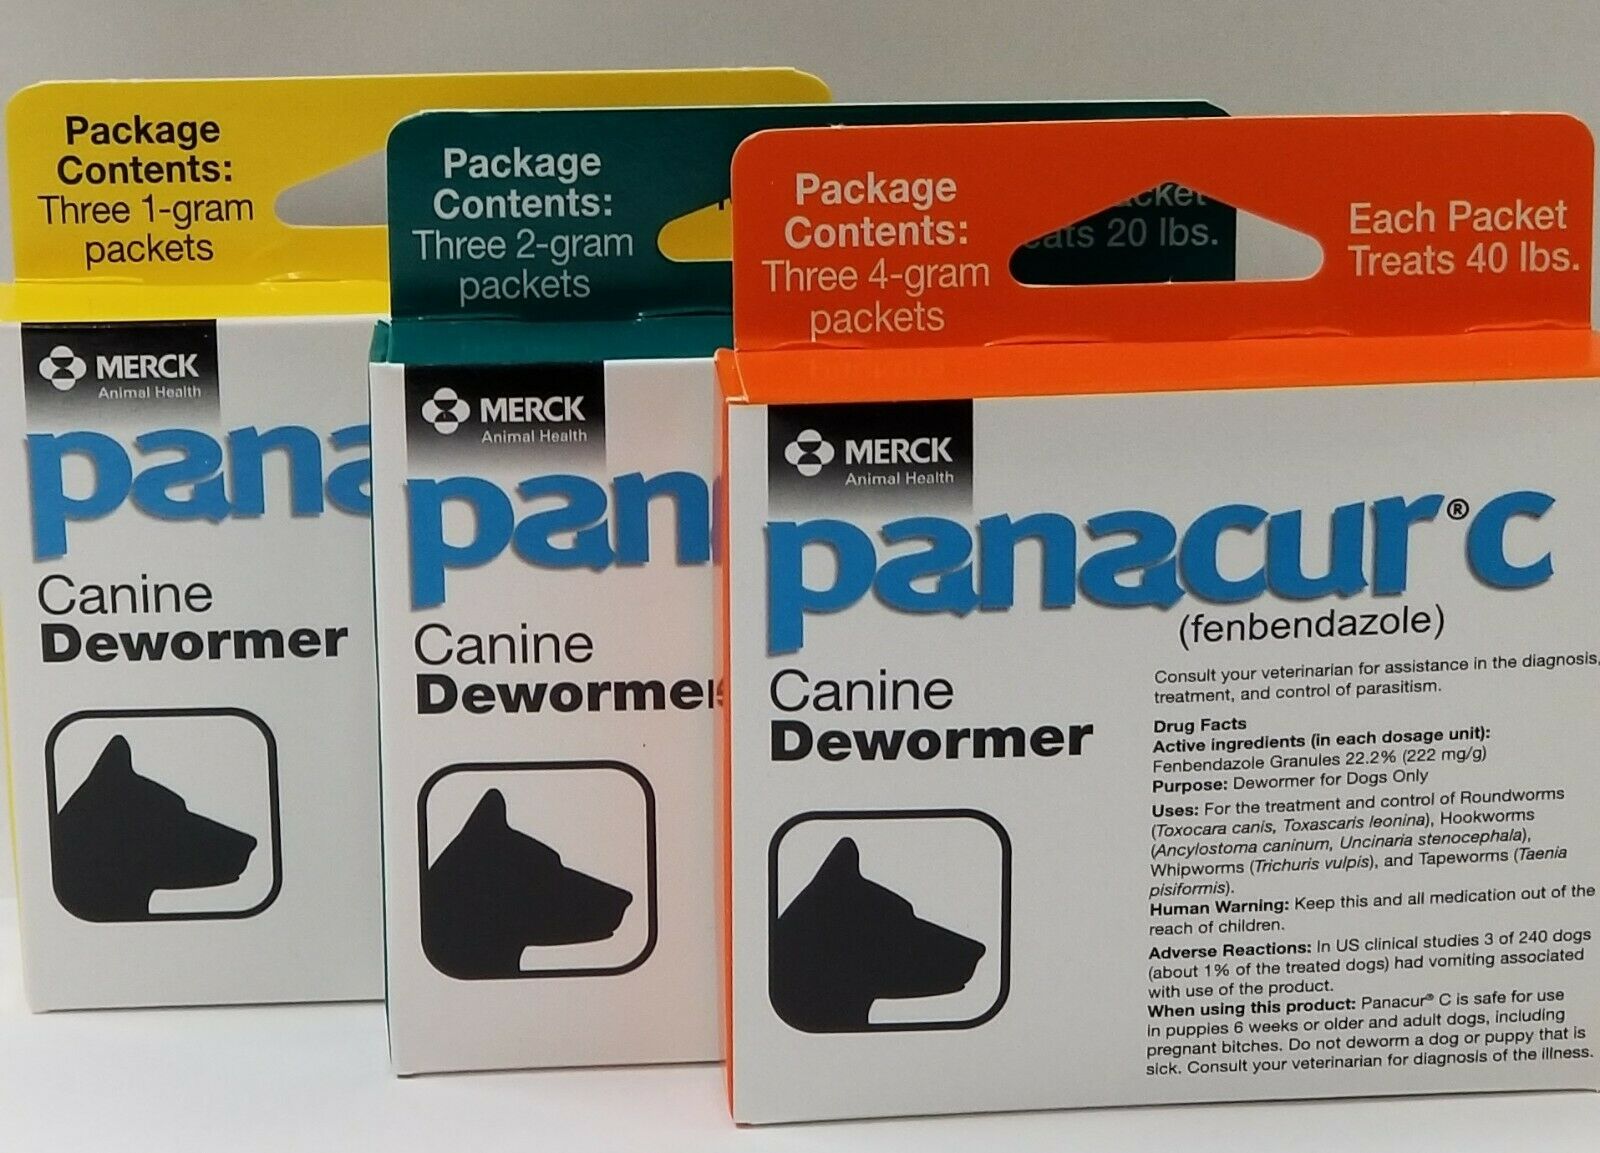 Panacur C Canine Dewormer Fenbendazole Control Of Parasites On Dogs *한국특송*